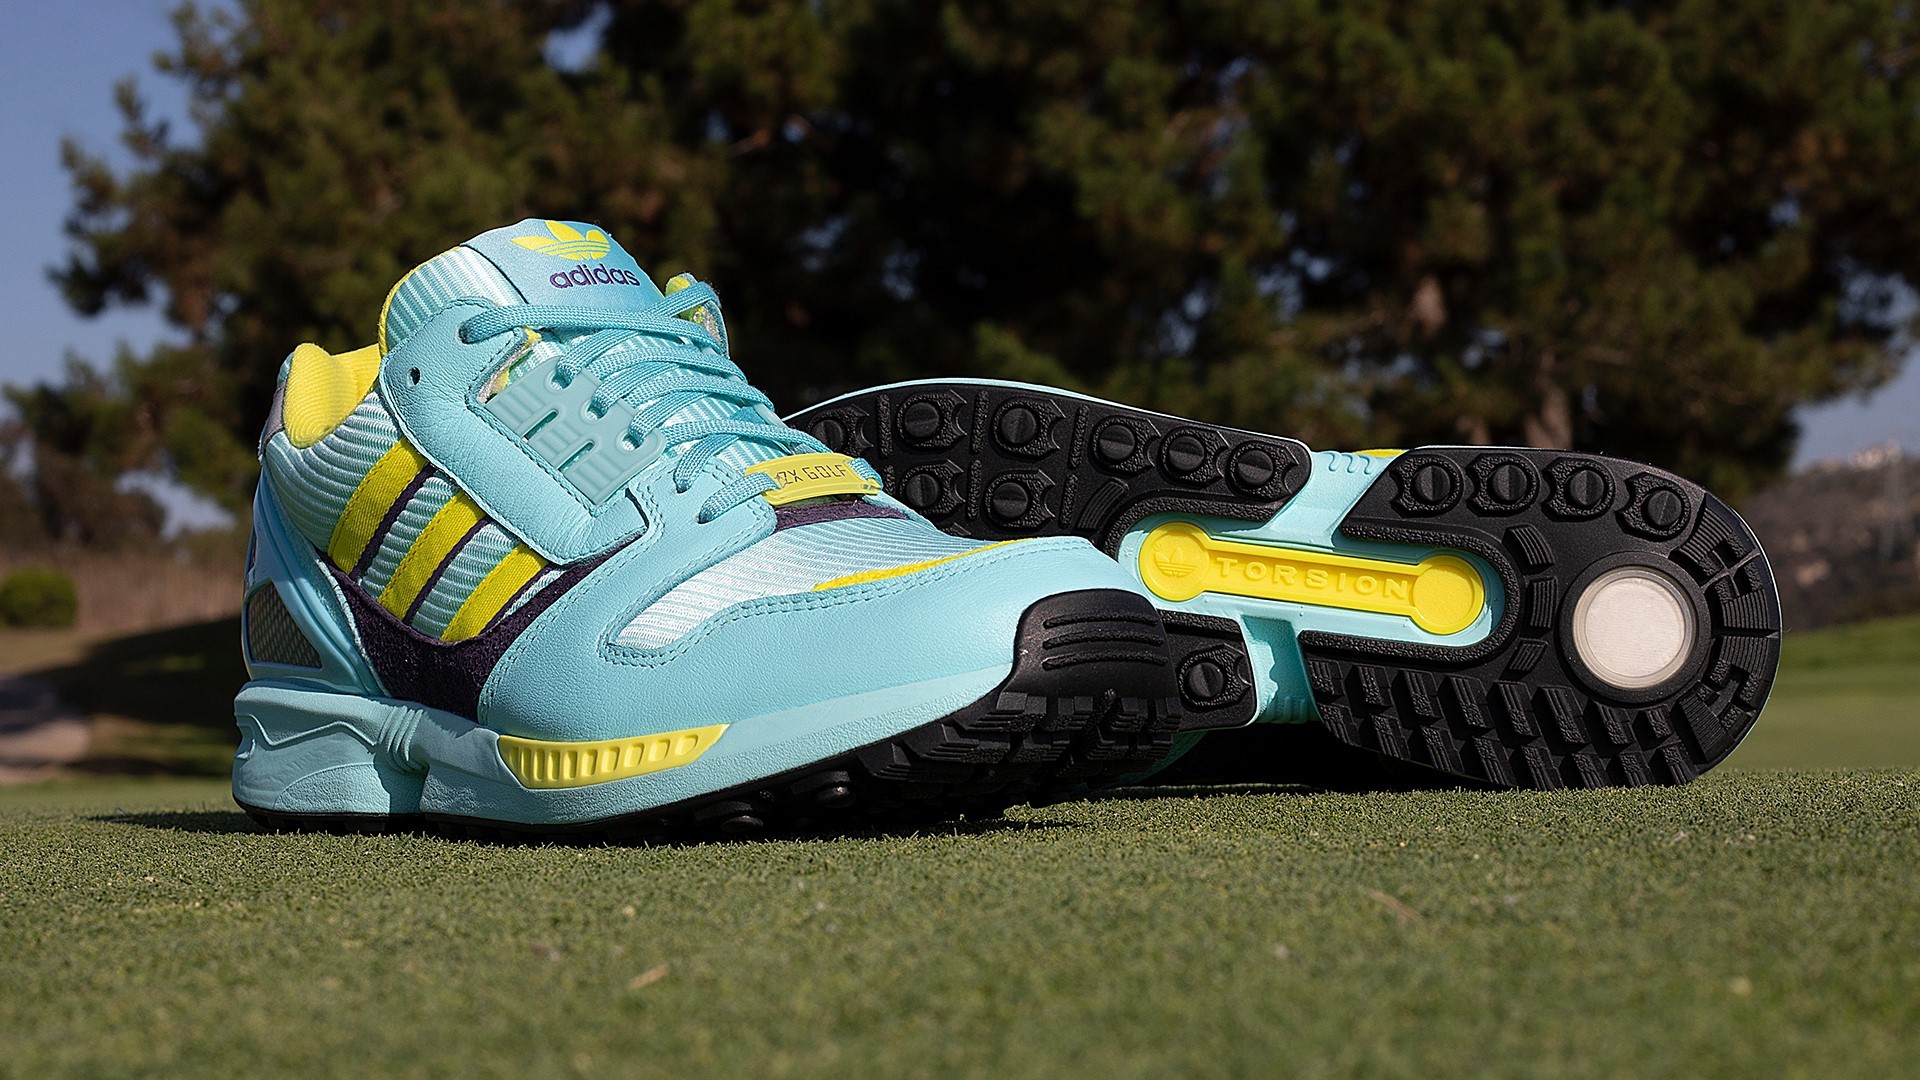 adidas Golf releases ZX 8000 Golf shoes